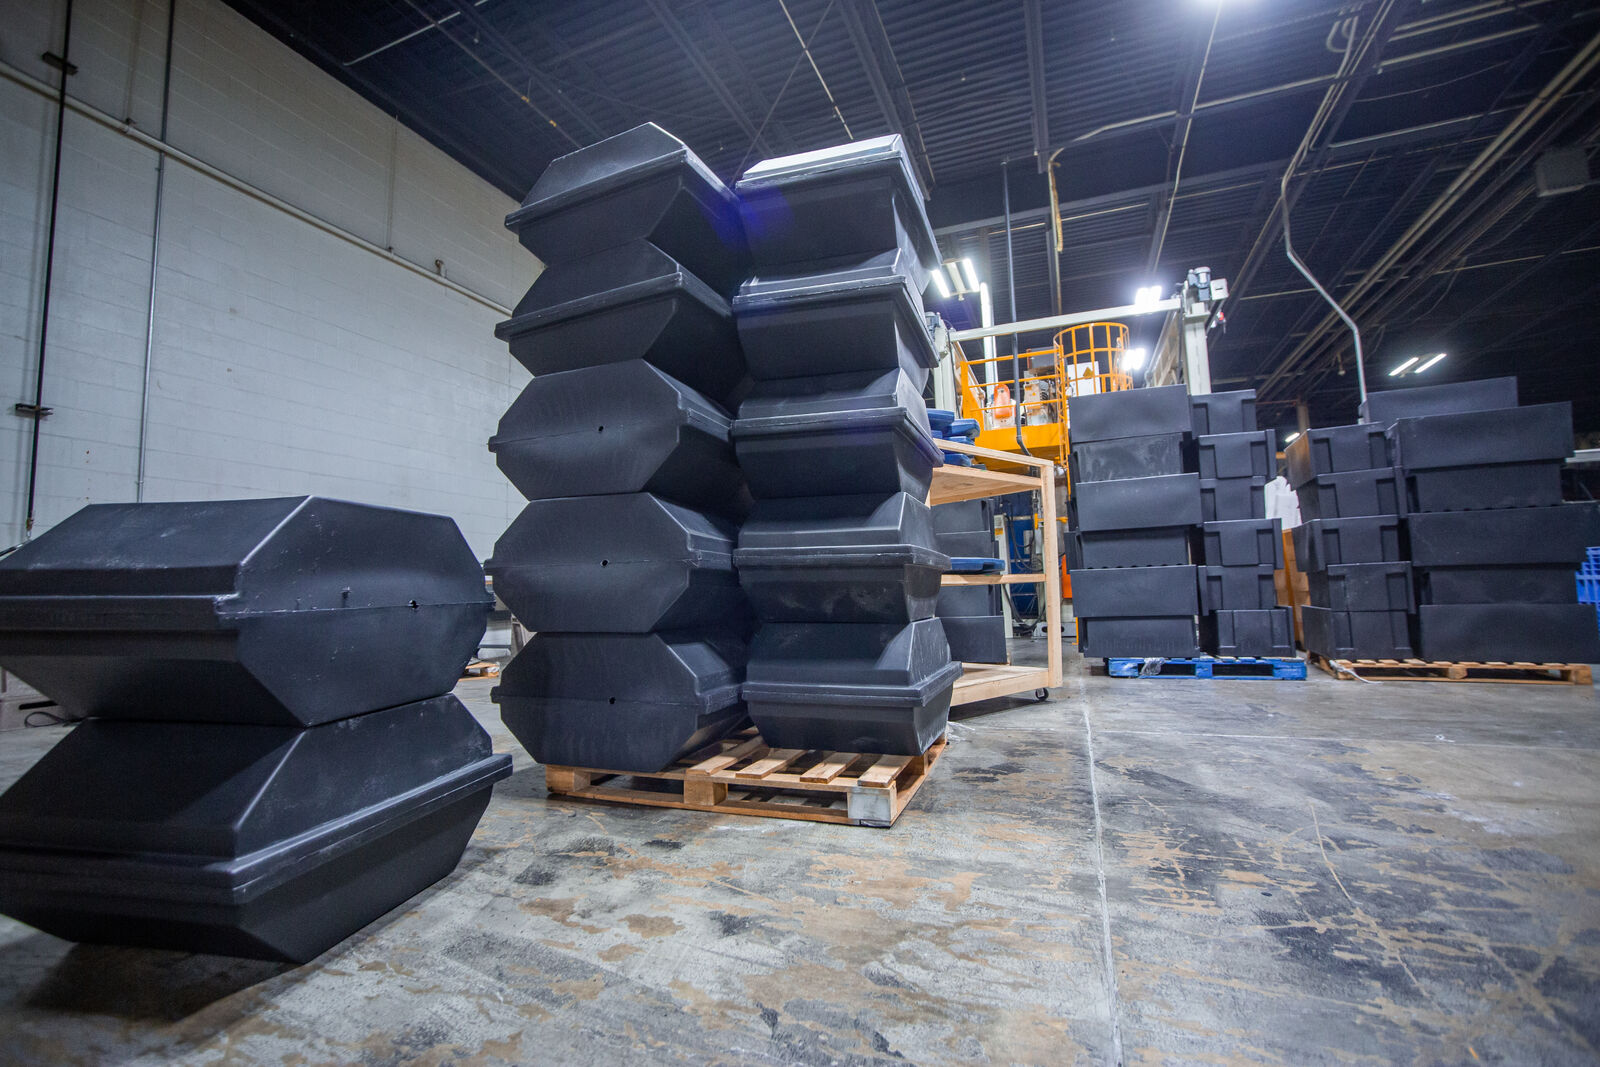 Black, rotomolded tank molds stacked in a warehouse